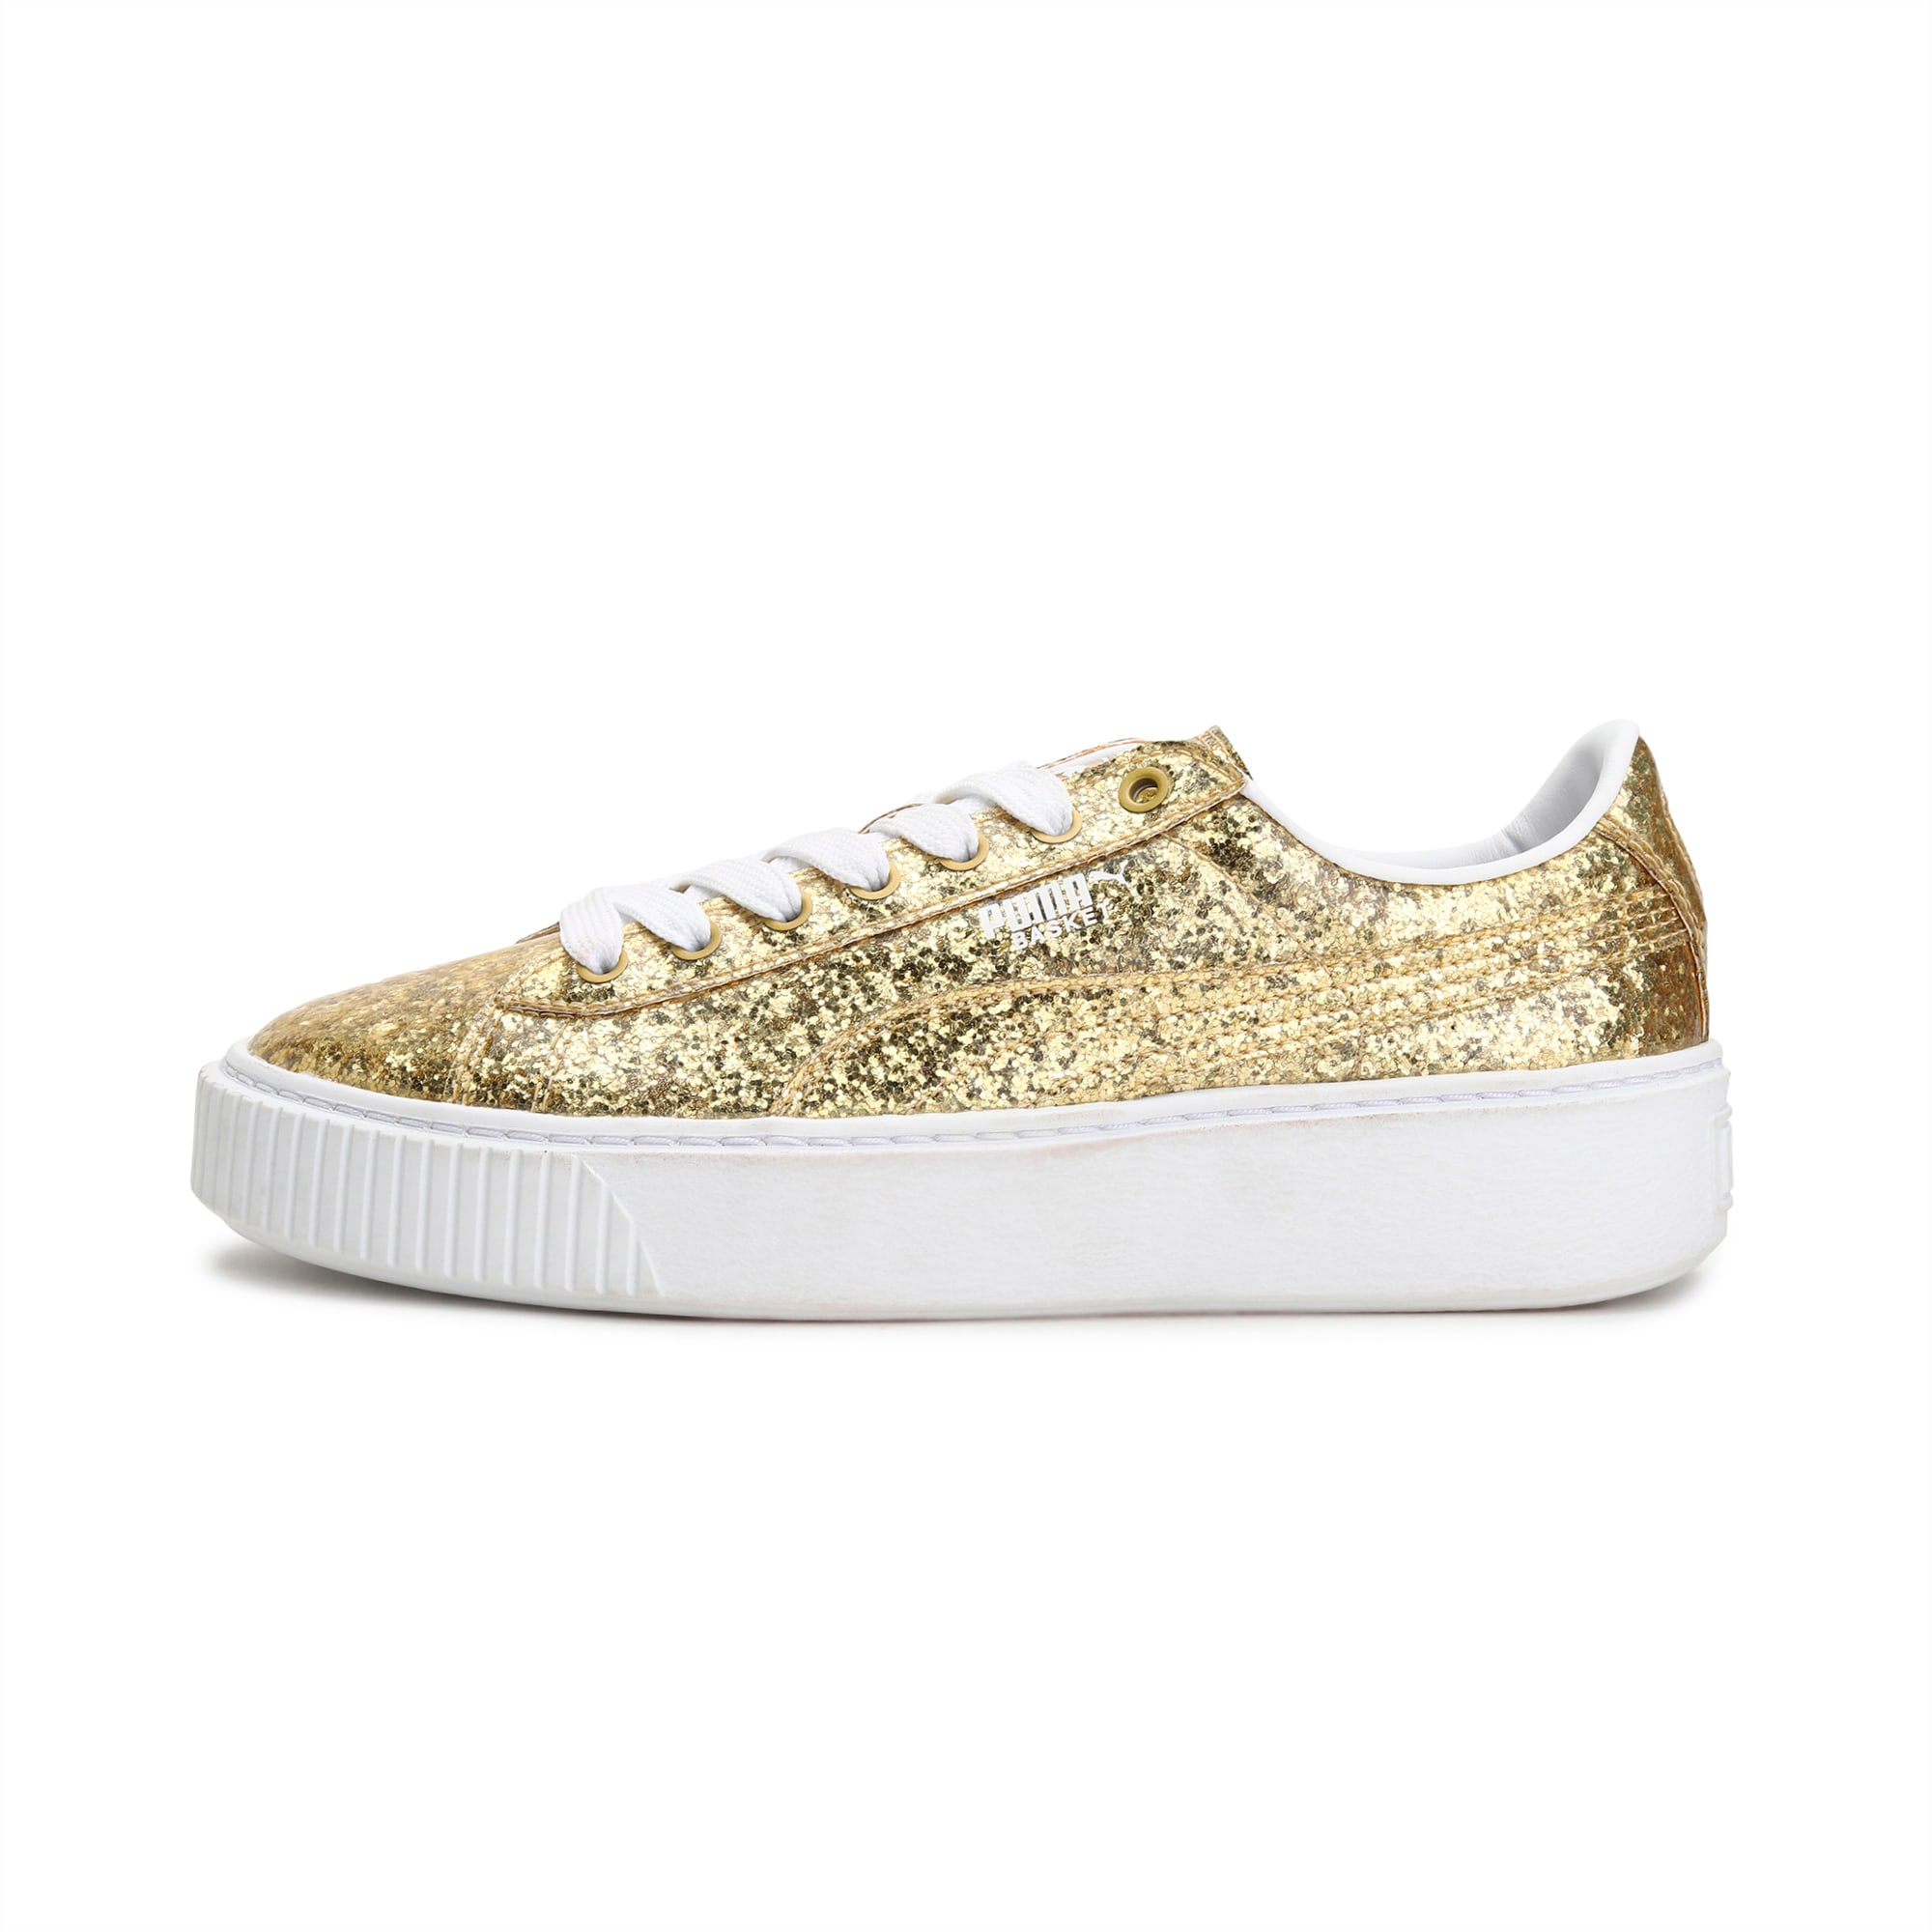 puma shoes with gold